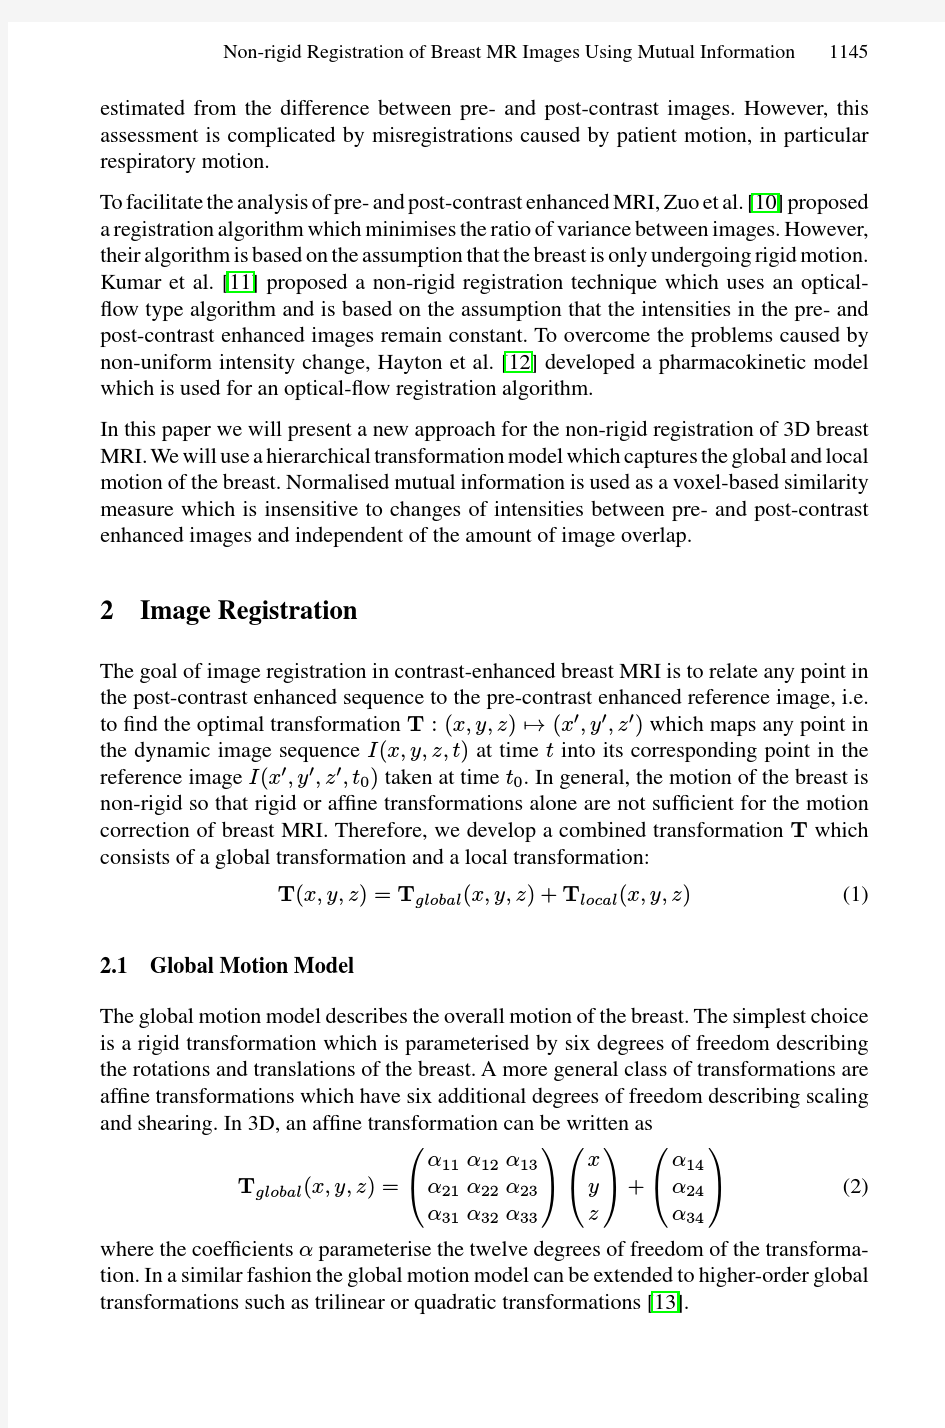 28.Non-rigid Registration of Breast MR Images Using Mutual Information